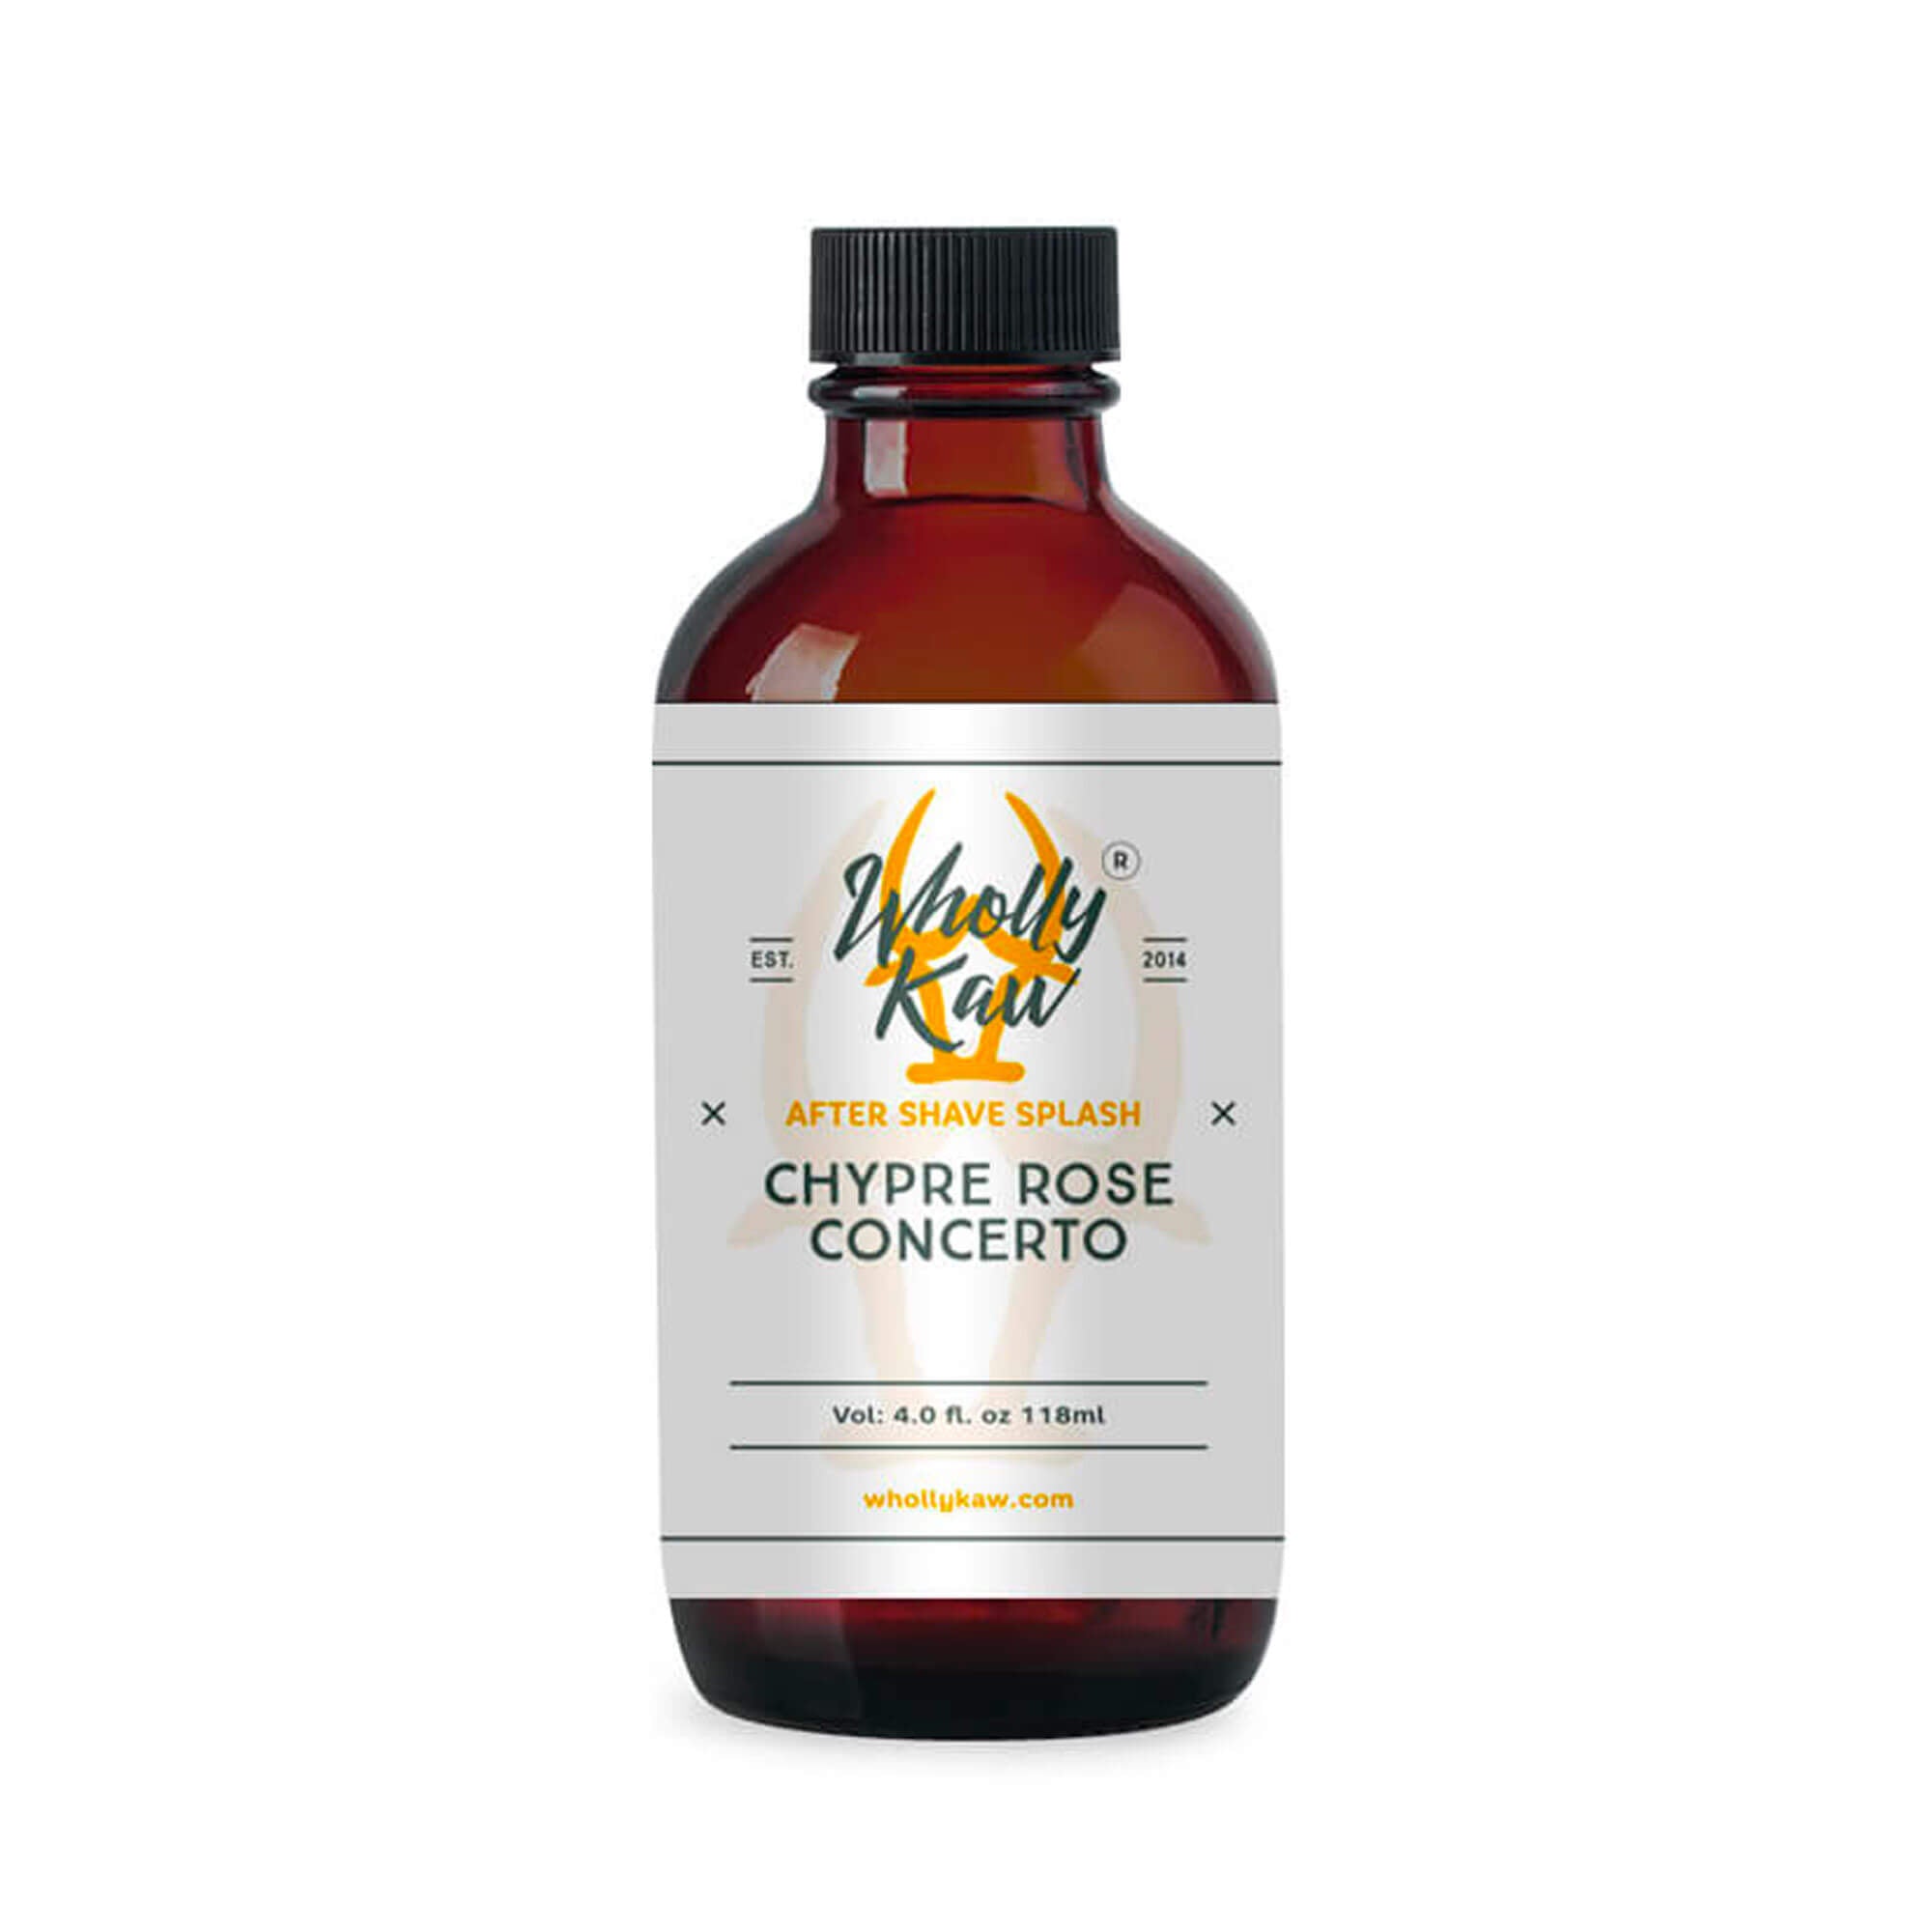 Wholly Kaw Chypre Rose Concerto Aftershave Splash